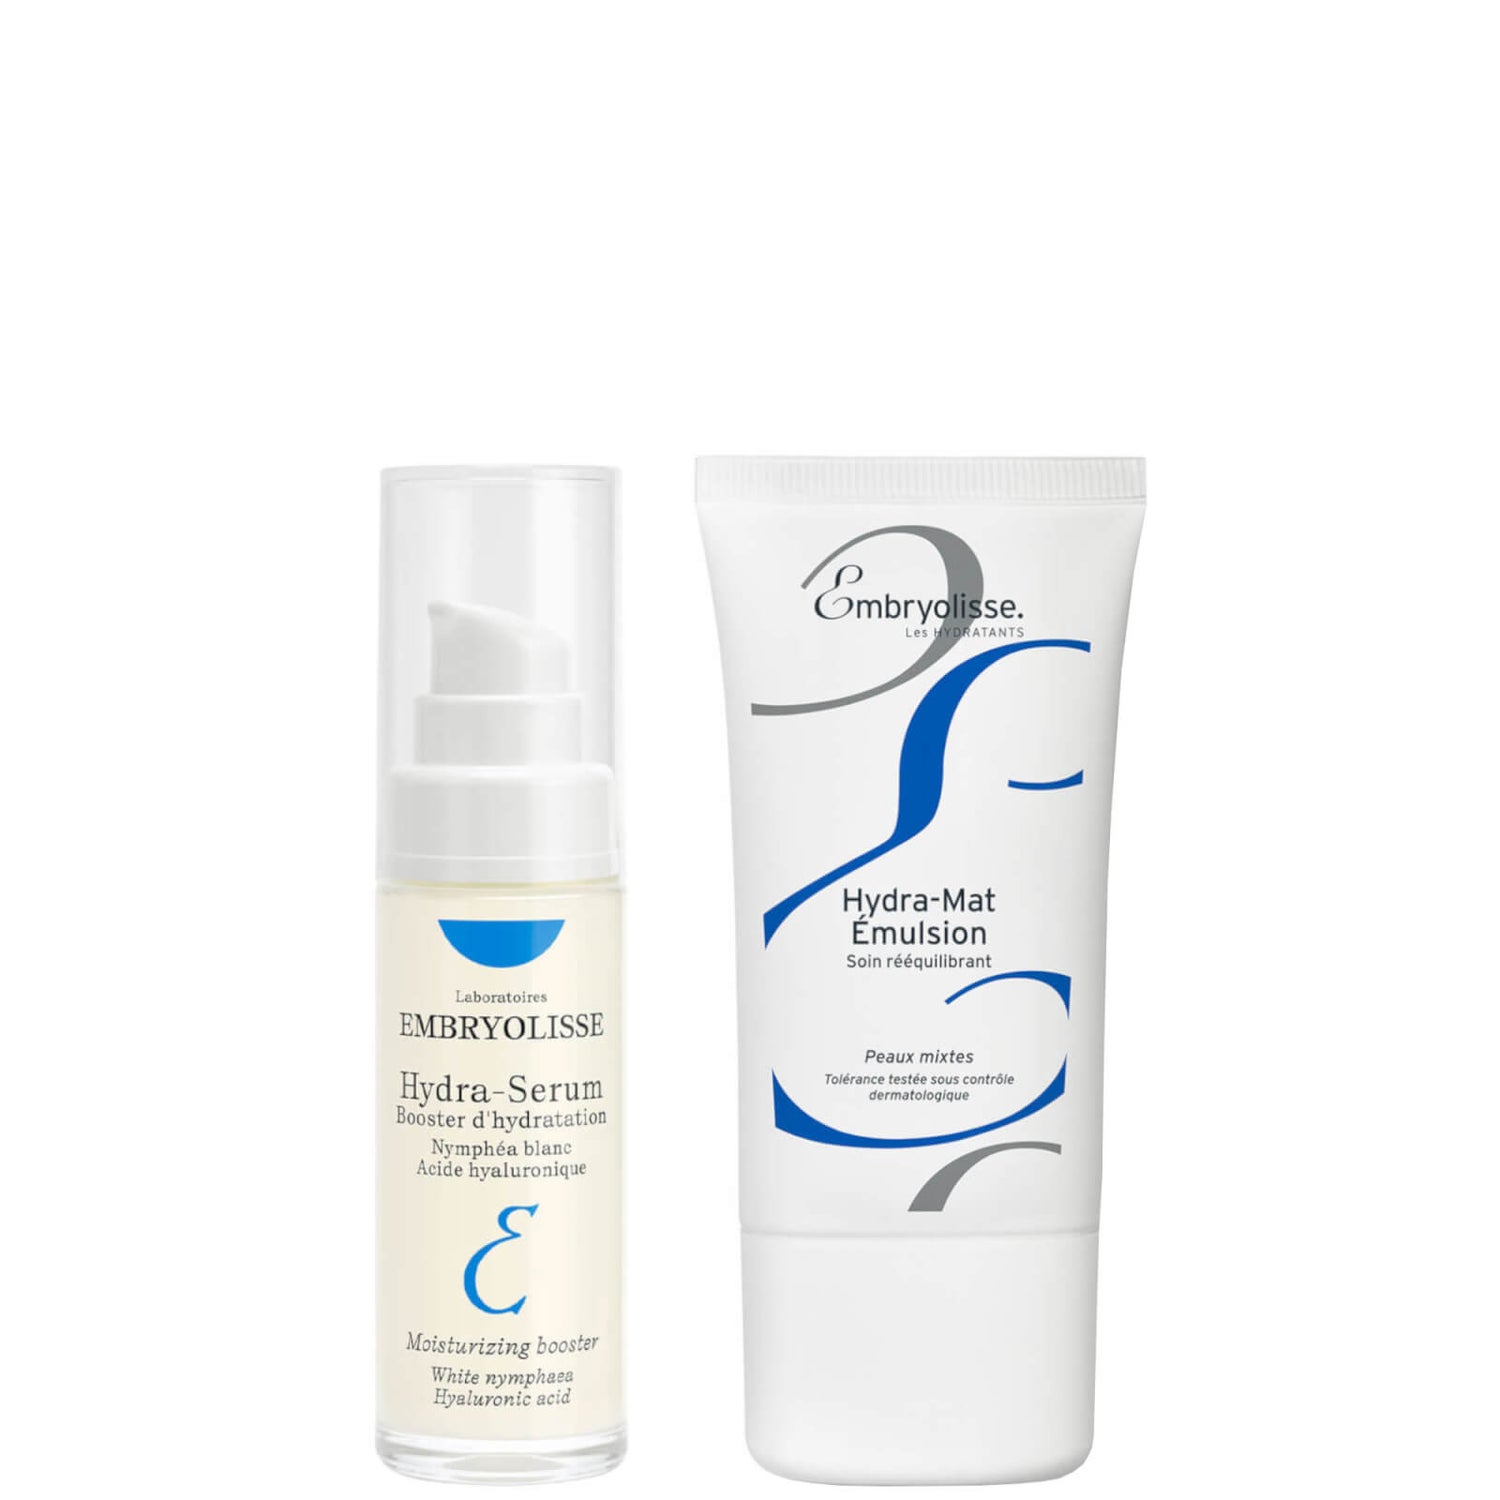 Embryolisse Matte and Hydrated Skin Bundle - Oily to Combination Skin